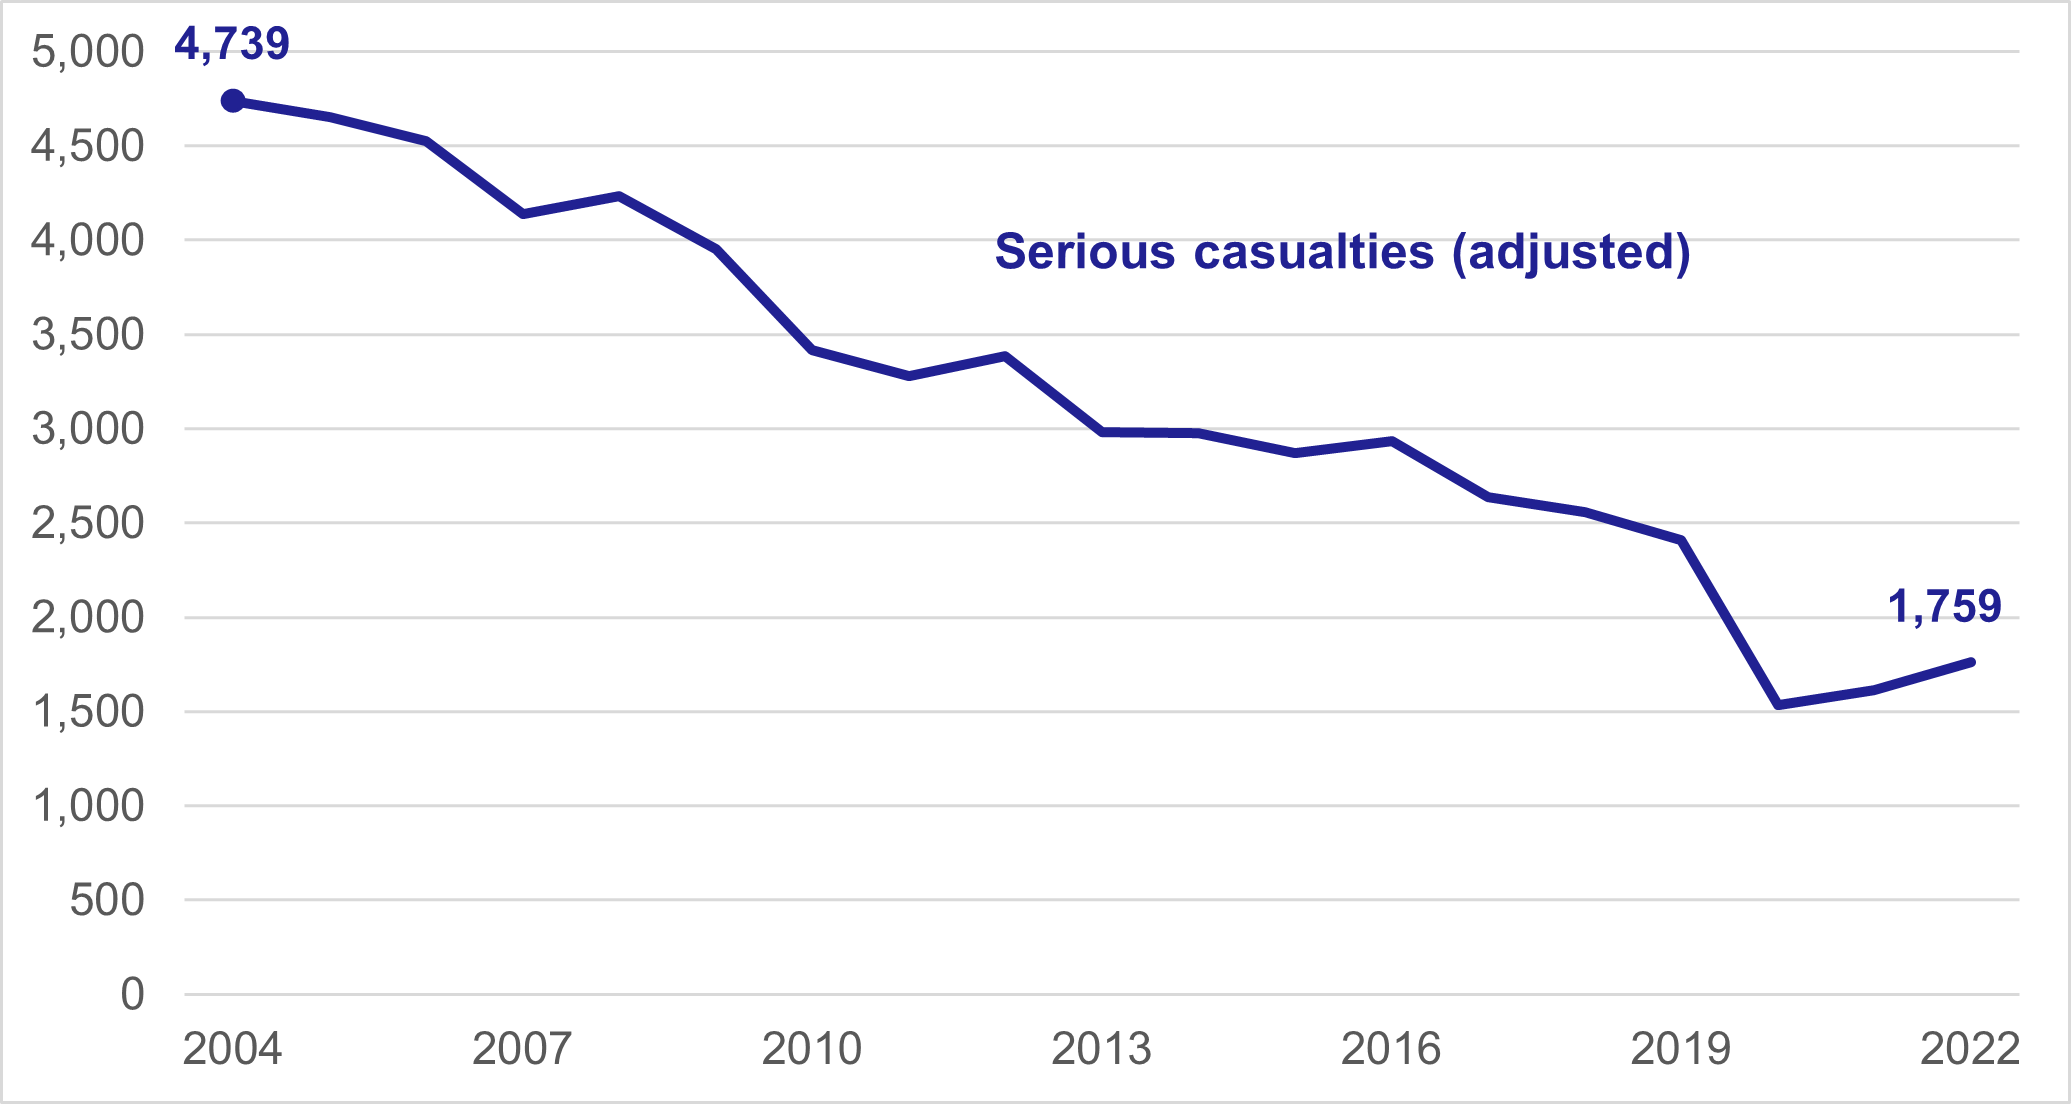 Figure 4: Number of serious road casualties, adjusted 2004 – 2022 - as described in text above